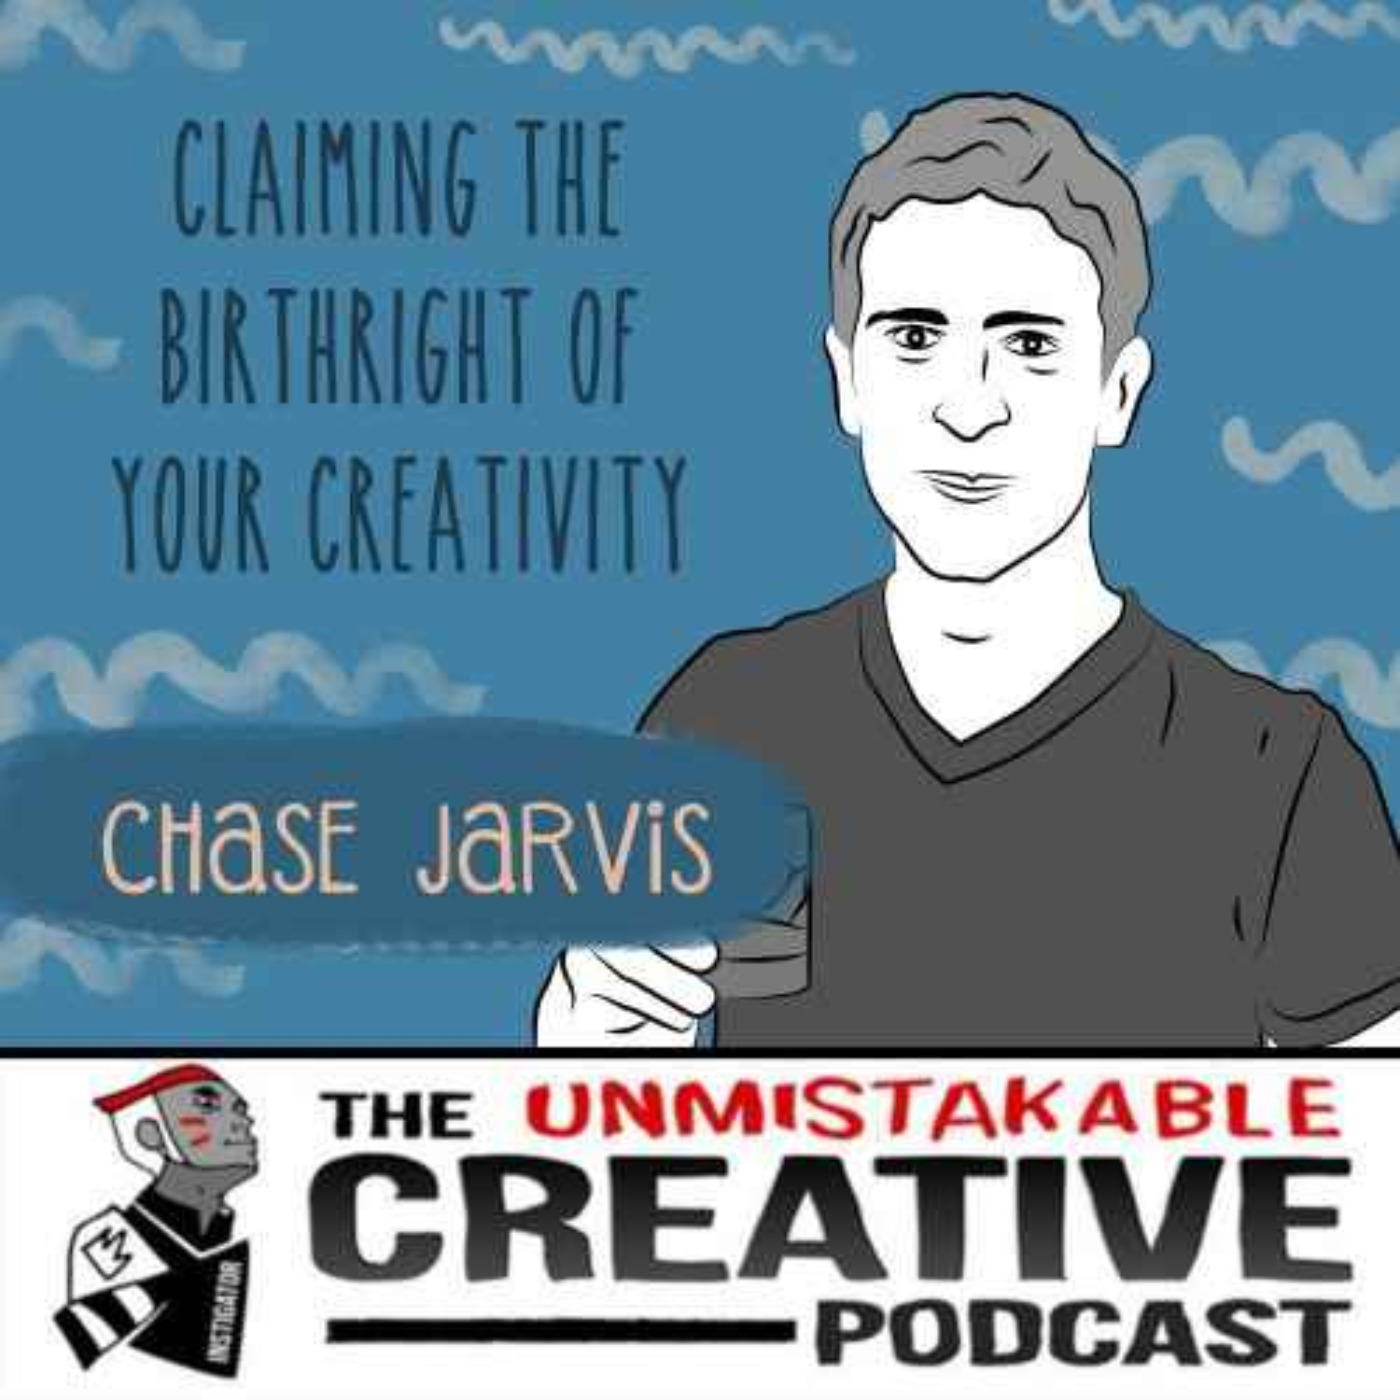 The Wisdom Series: Chase Jarvis | Claiming The Birthright of Your Creativity